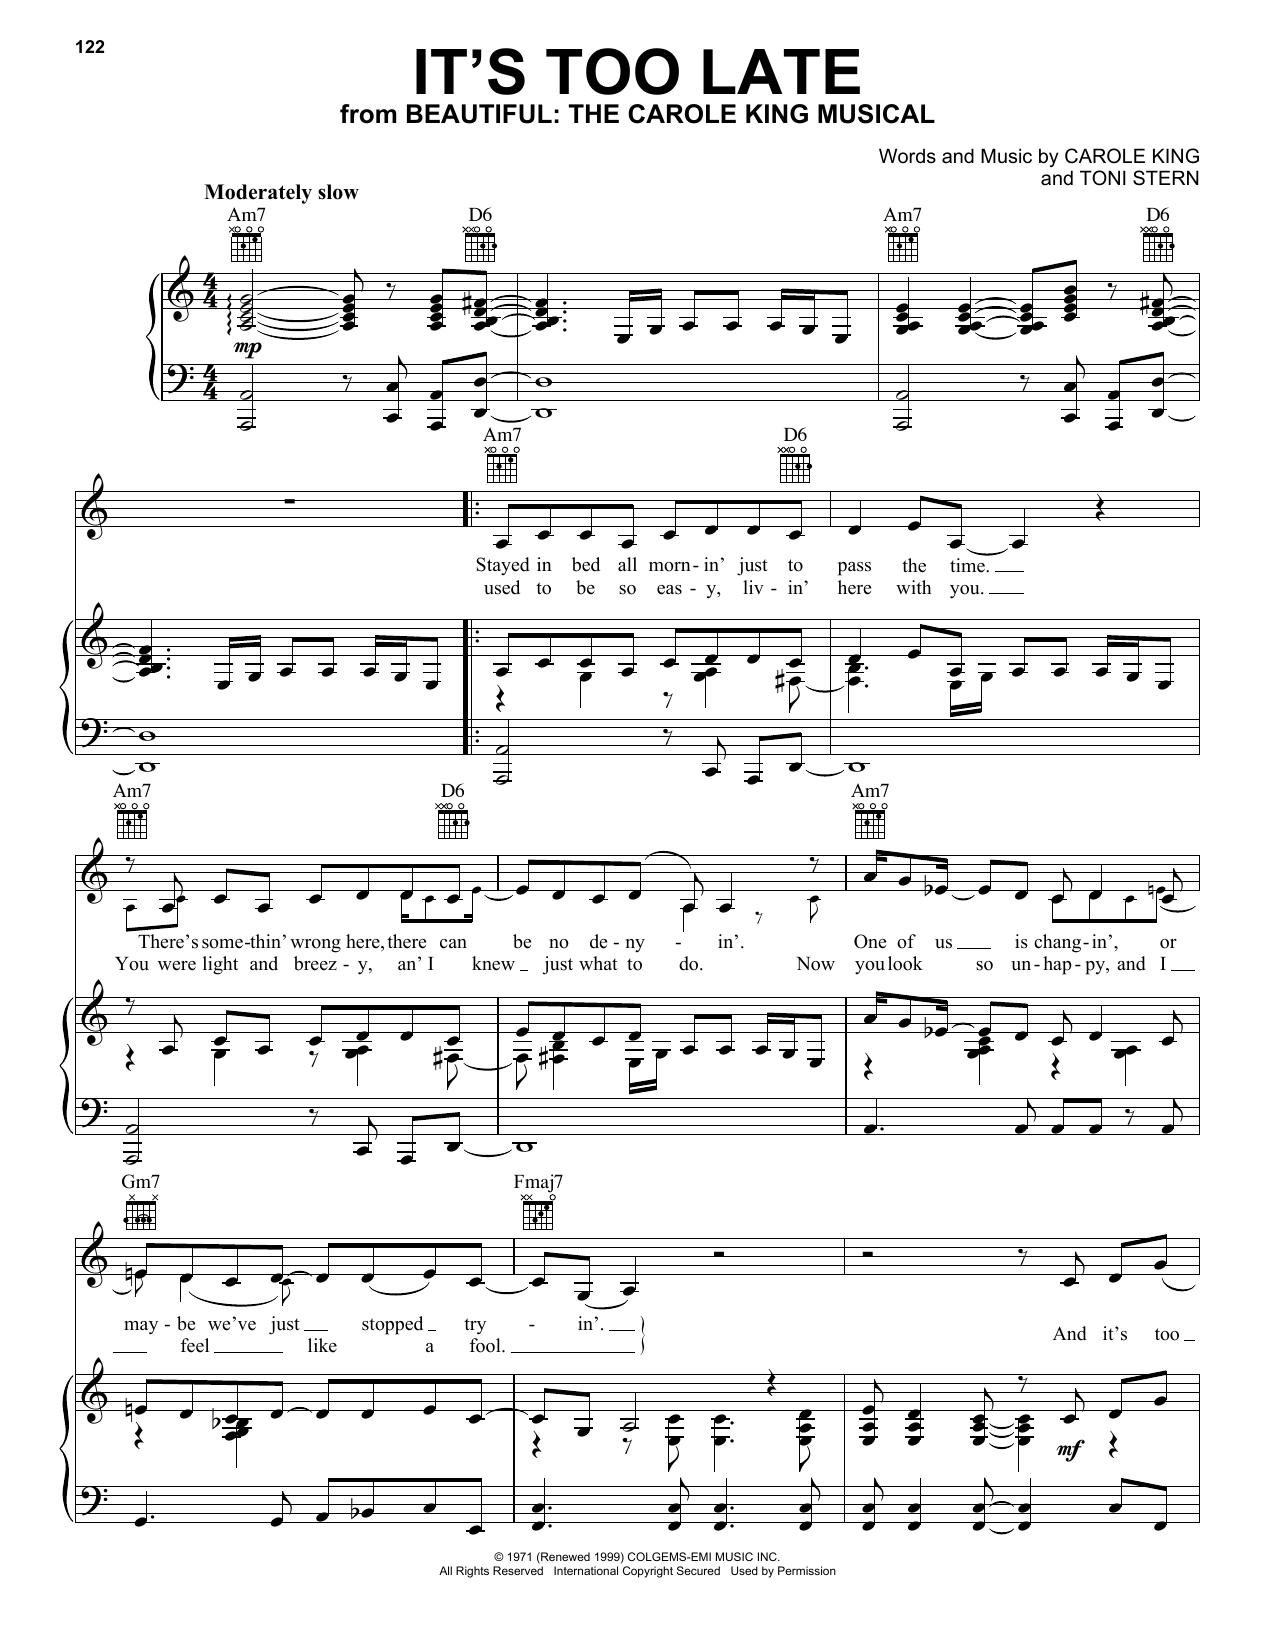 Carole King It's Too Late sheet music notes and chords. Download Printable PDF.